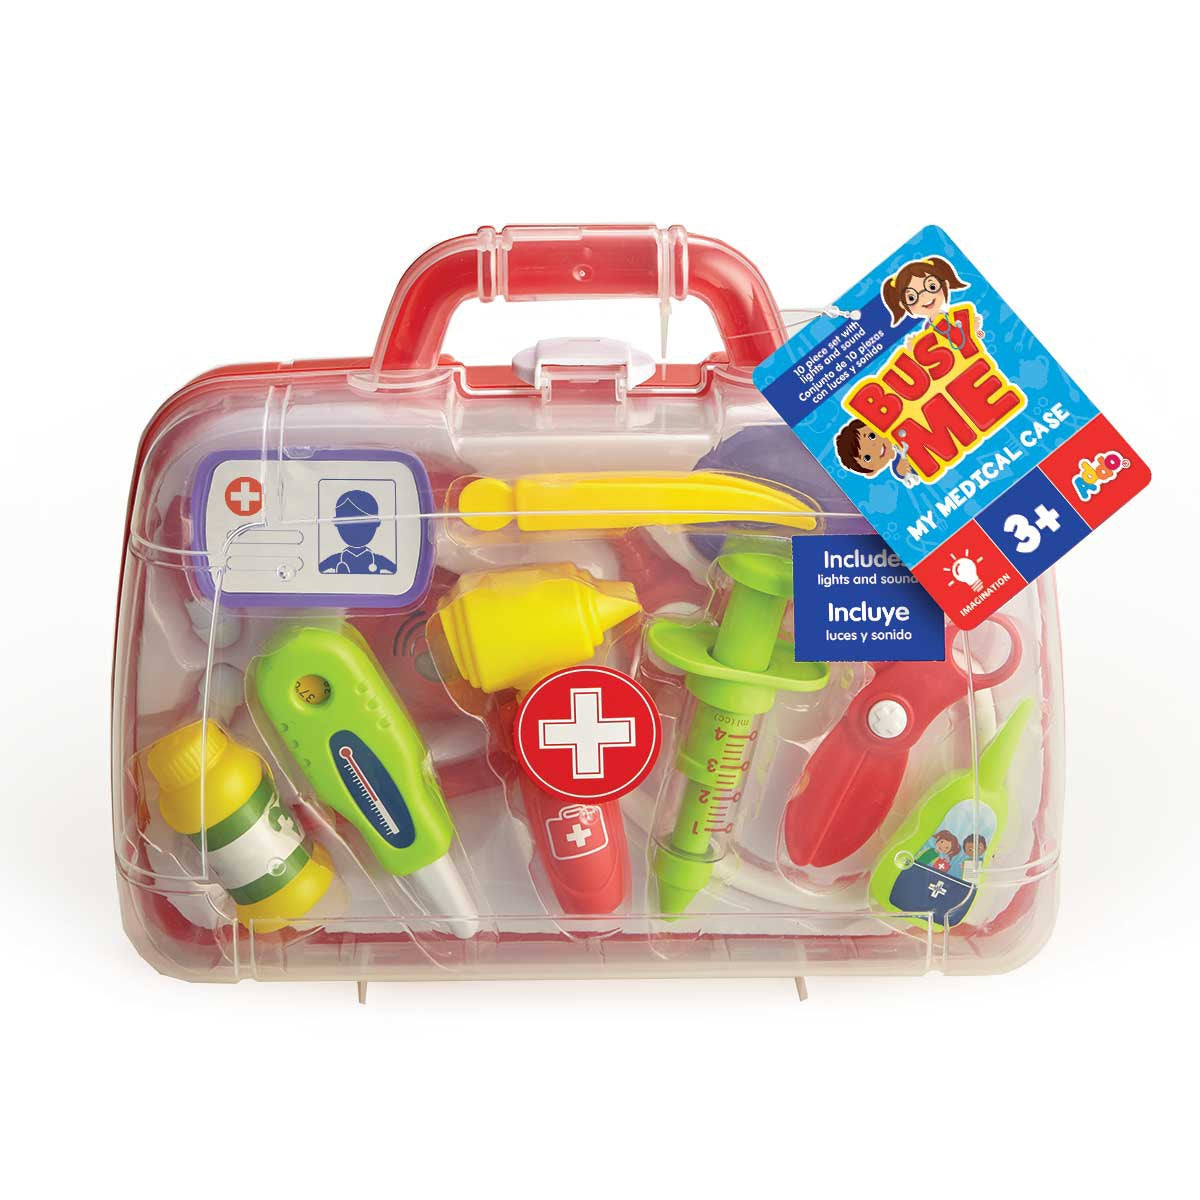 Busy Me My Medical Case Playset